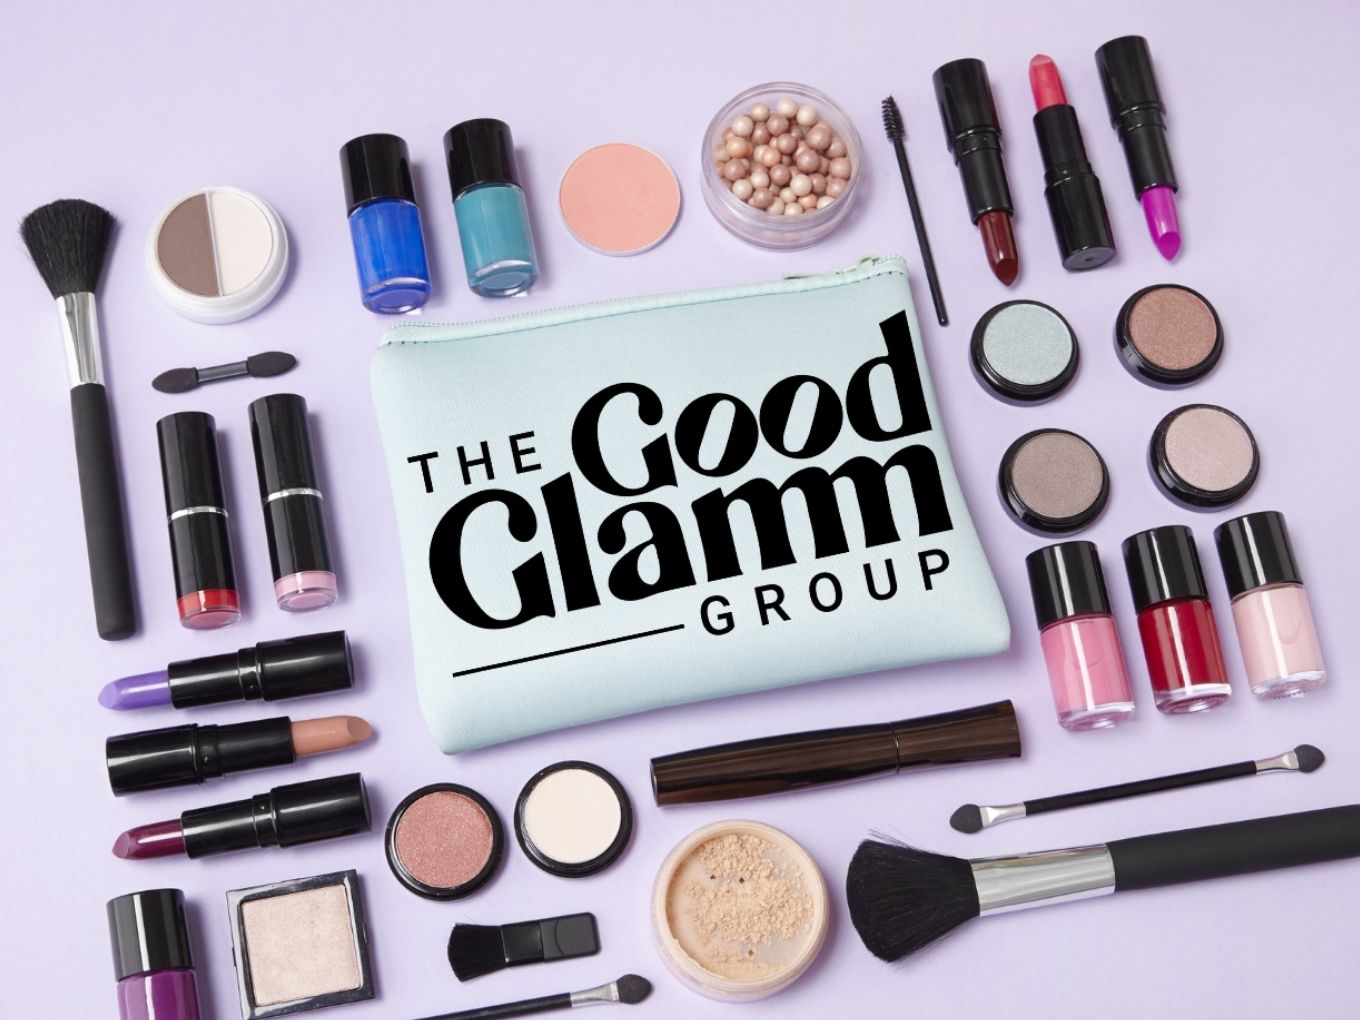 Now, The Good Glamm Group’s D2C Brands Division CEO Sukhleen Aneja Quits